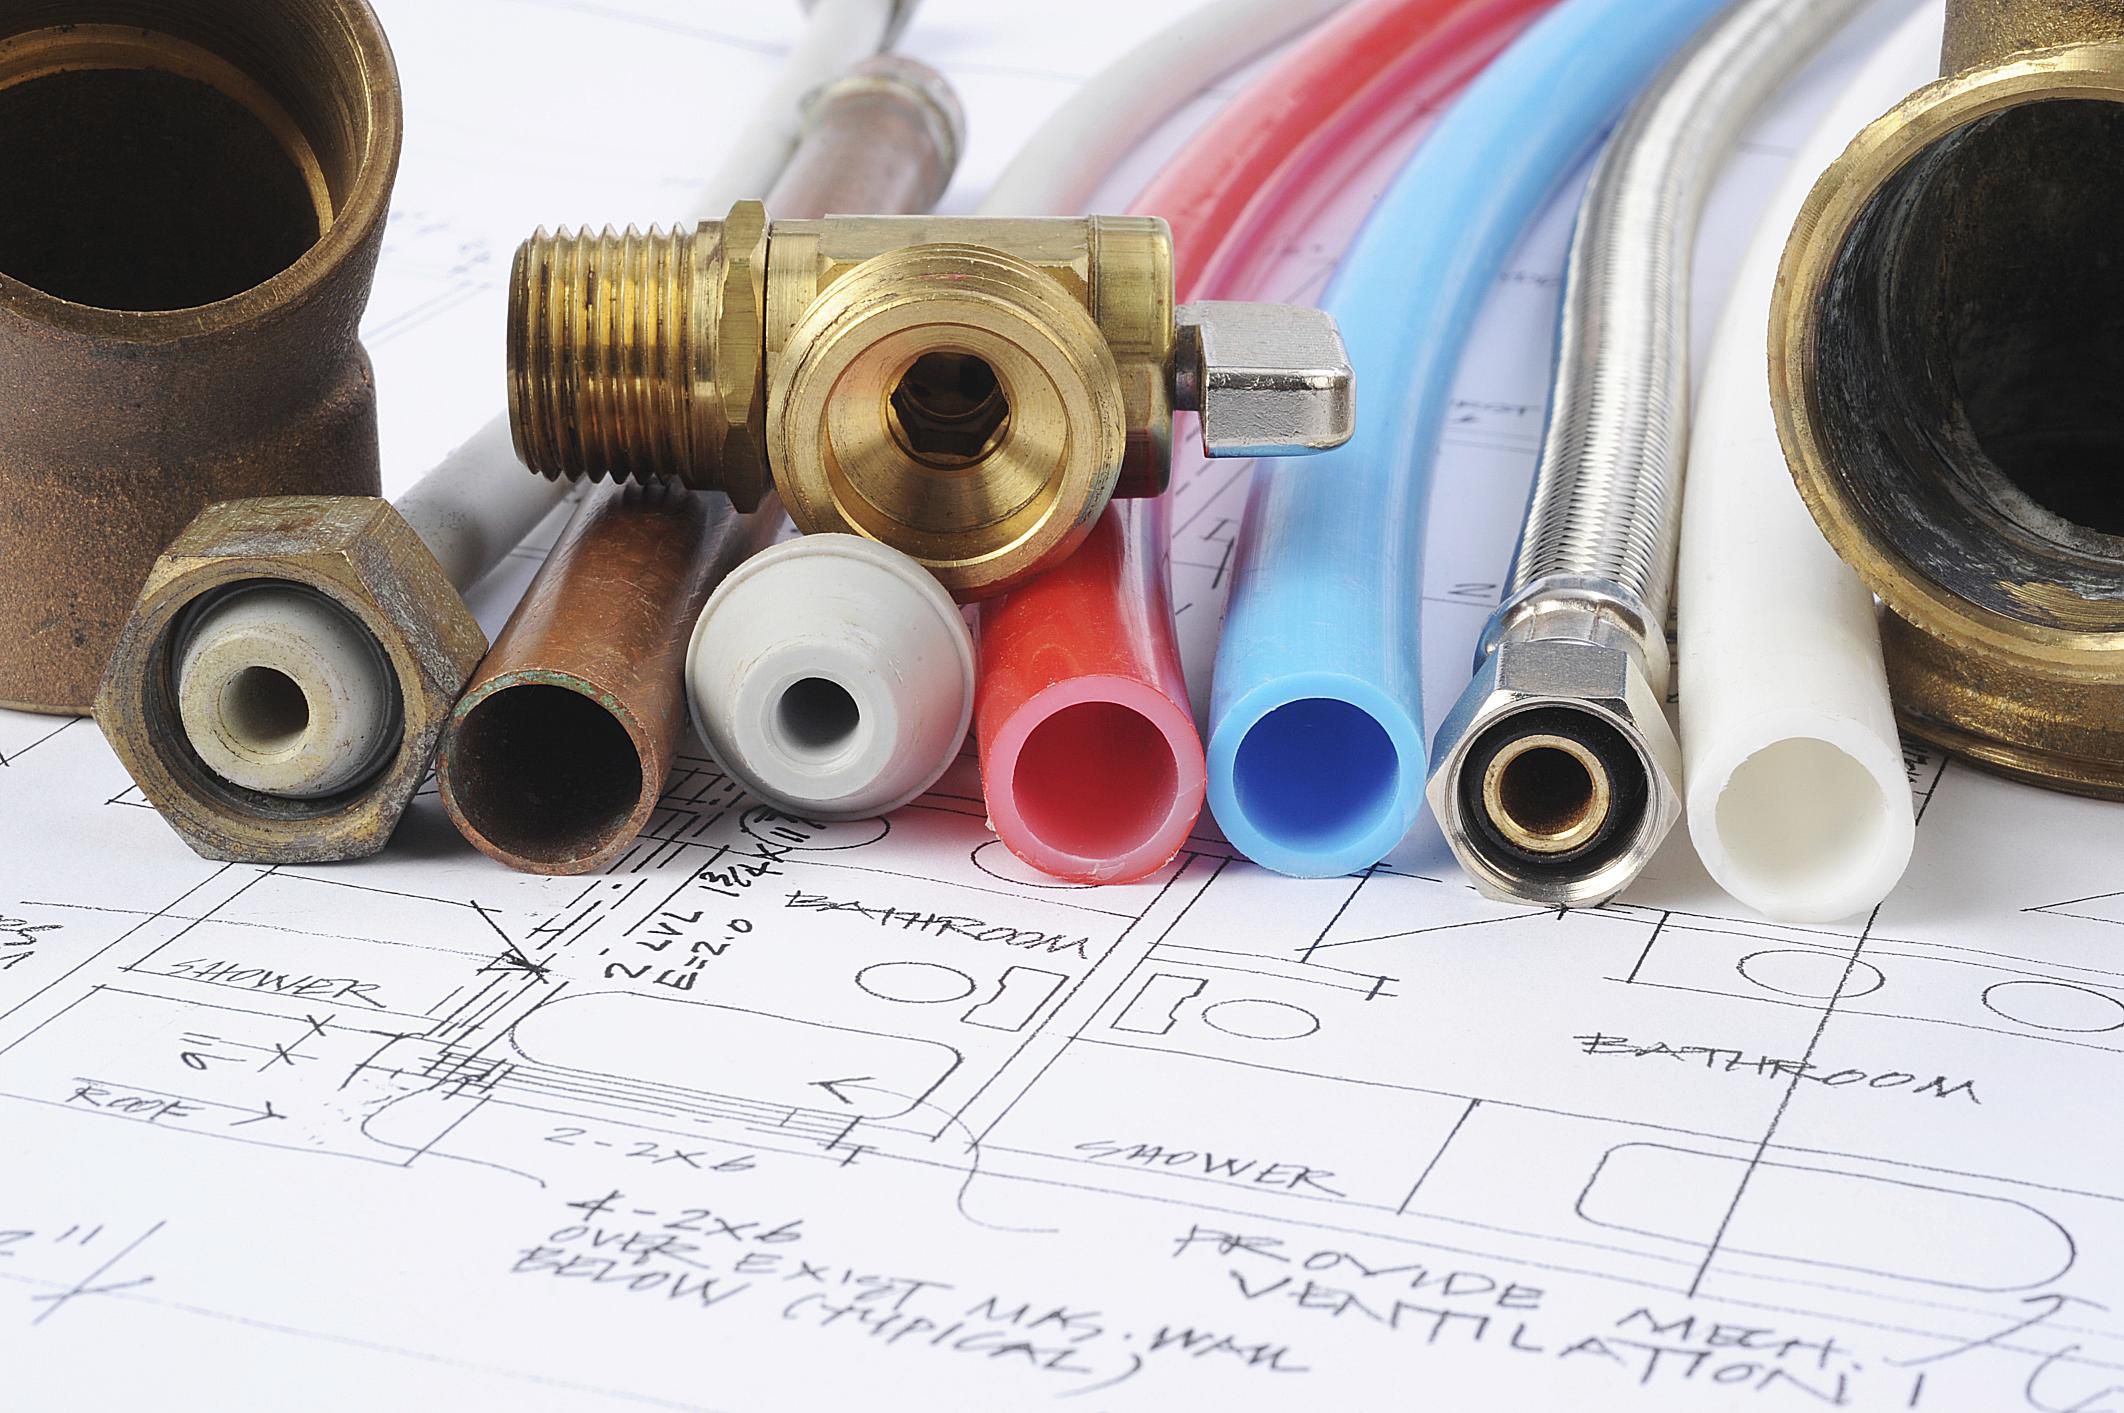 Basic Types of Plumbing Pipes You Might Encounter